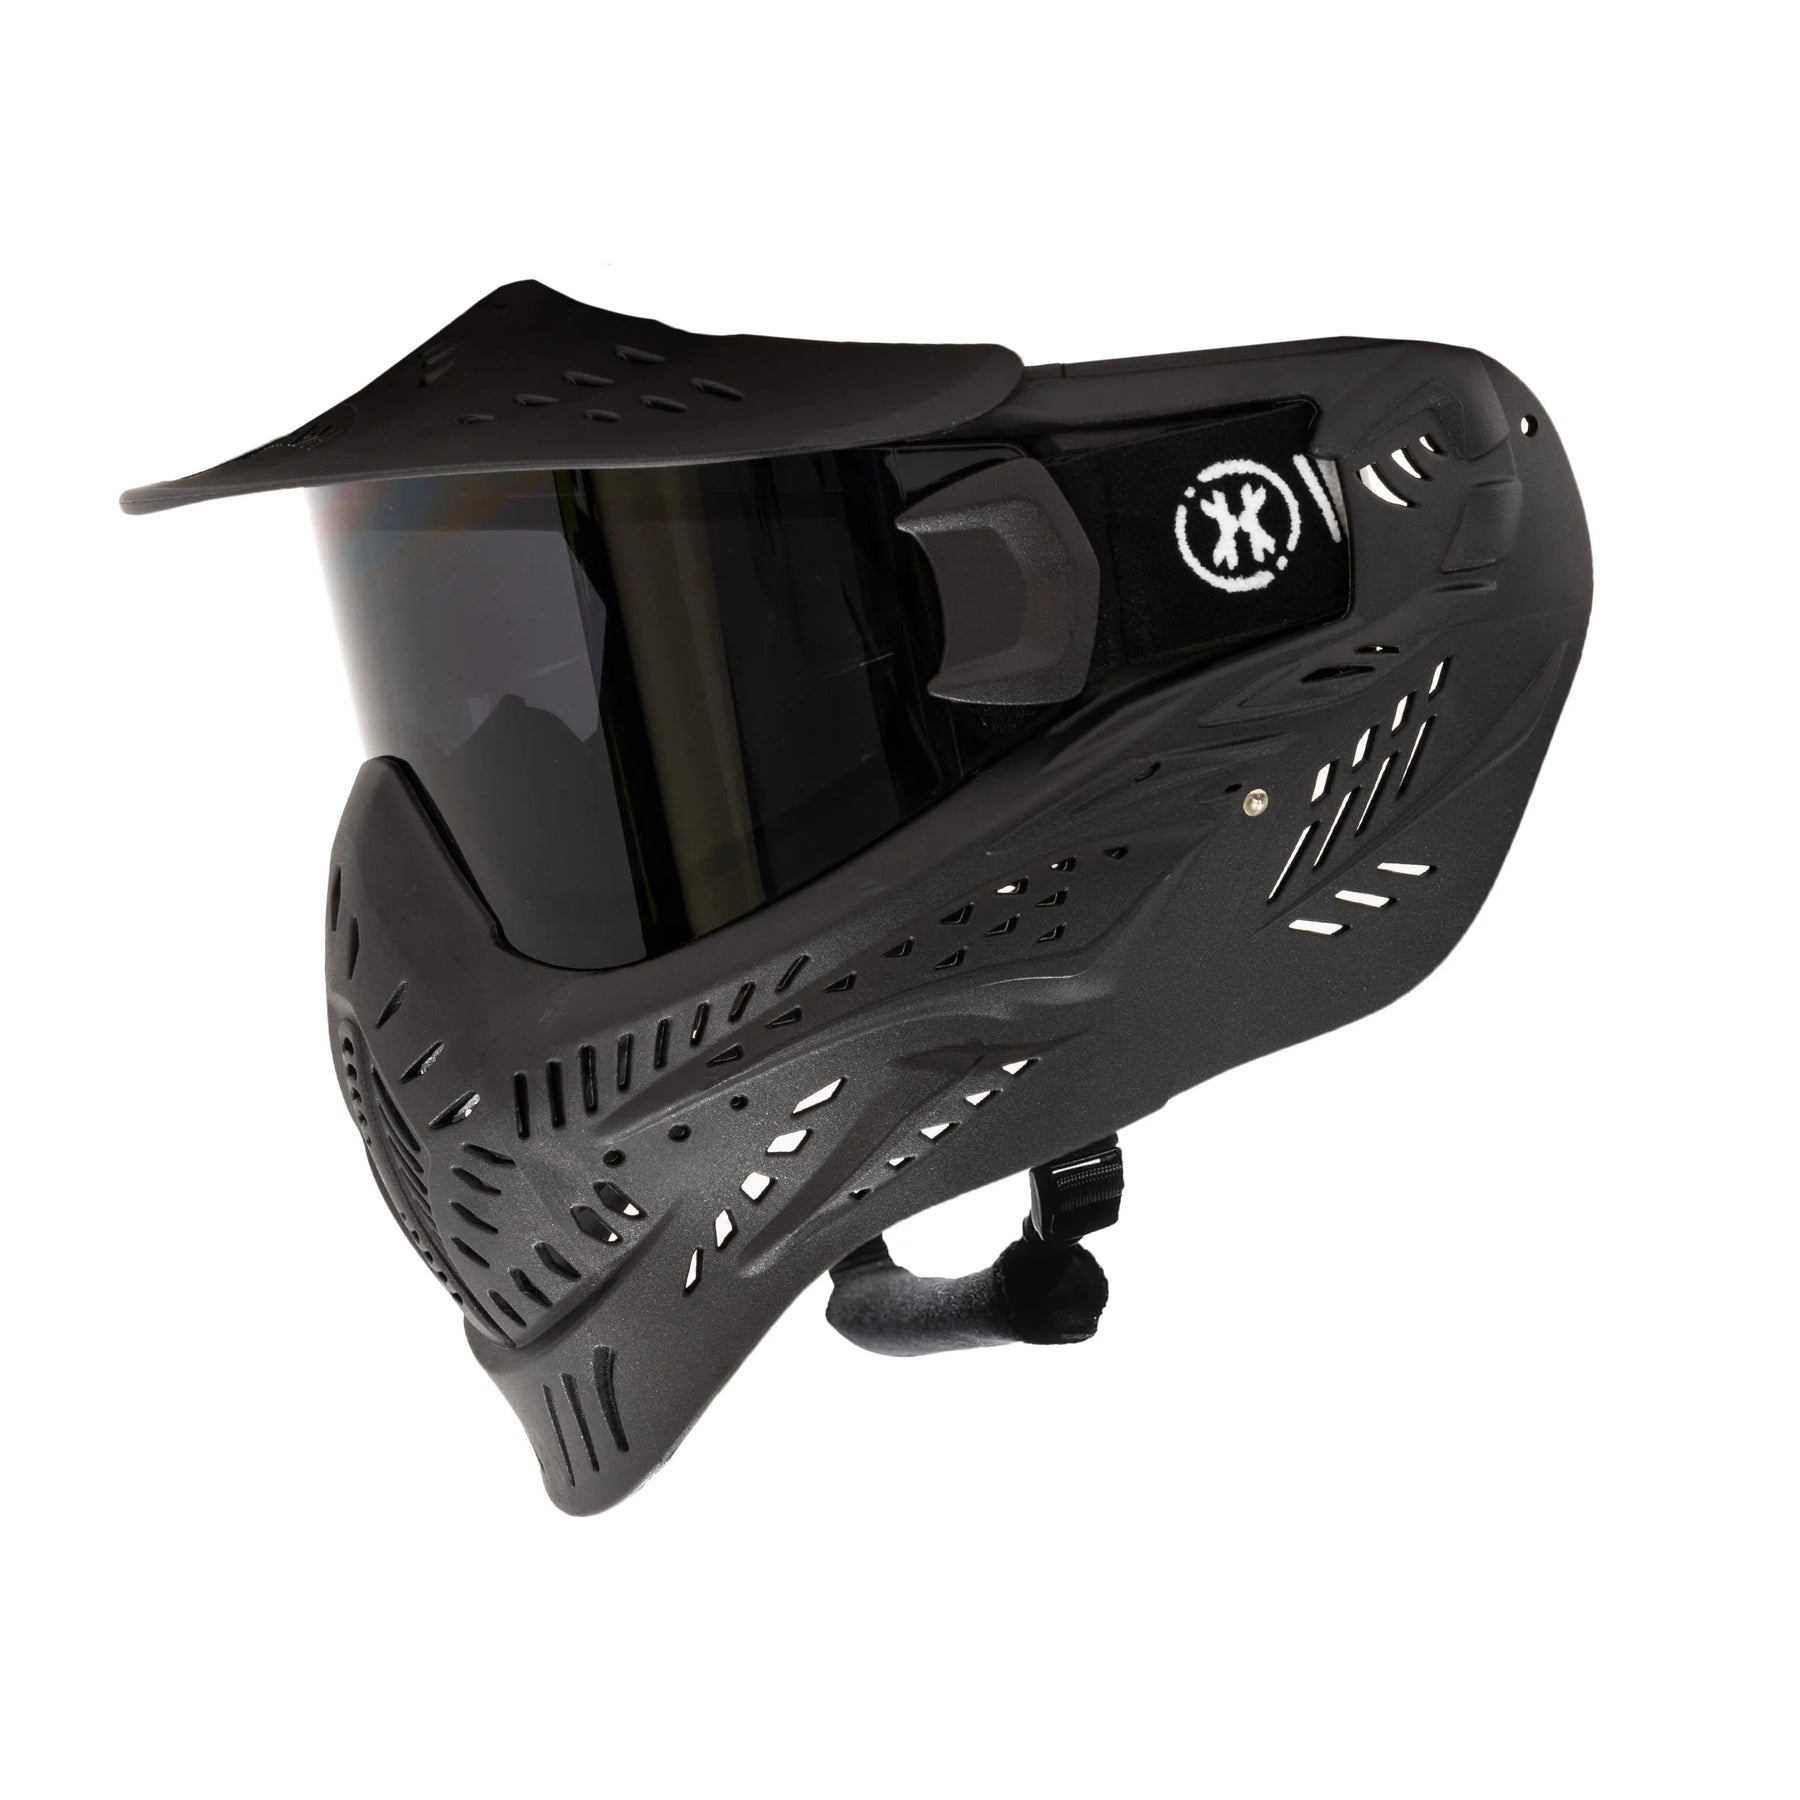 HSTL Goggle | Color: Black W/ Smoke Thermal Lens | Paintball & Airsoft Goggle